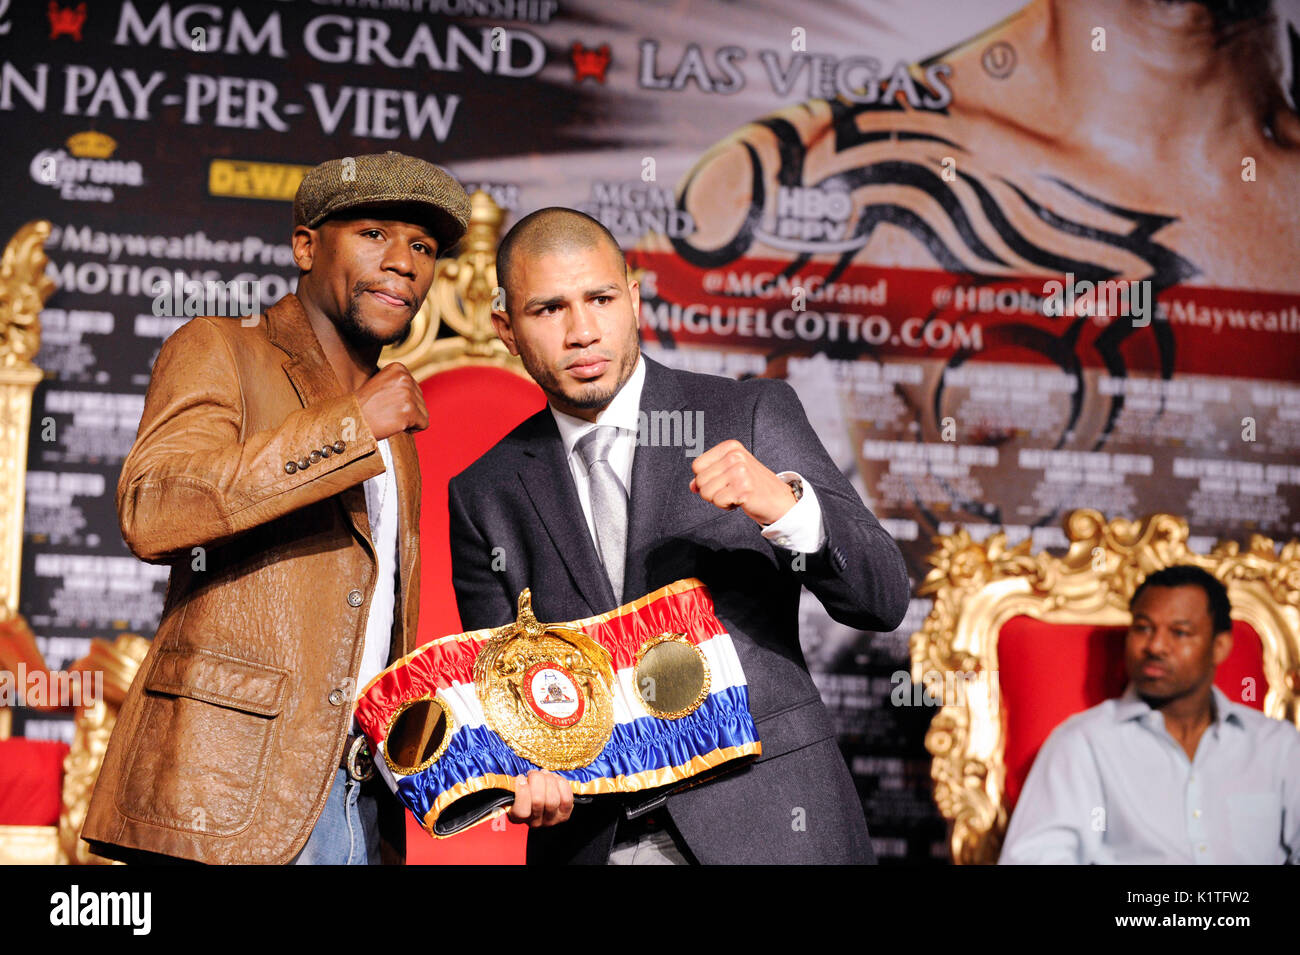 US boxer Floyd Mayweather (L) WBA Super Welterweight World Champion Miguel Cotto Puerto Rico during press conference Grauman's Chinese Theatre Hollywood March 1,2012. Mayweather Cotto will meet WBA Super Welterweight World Championship fight May 5 MGM Grand Las Vegas. Stock Photo